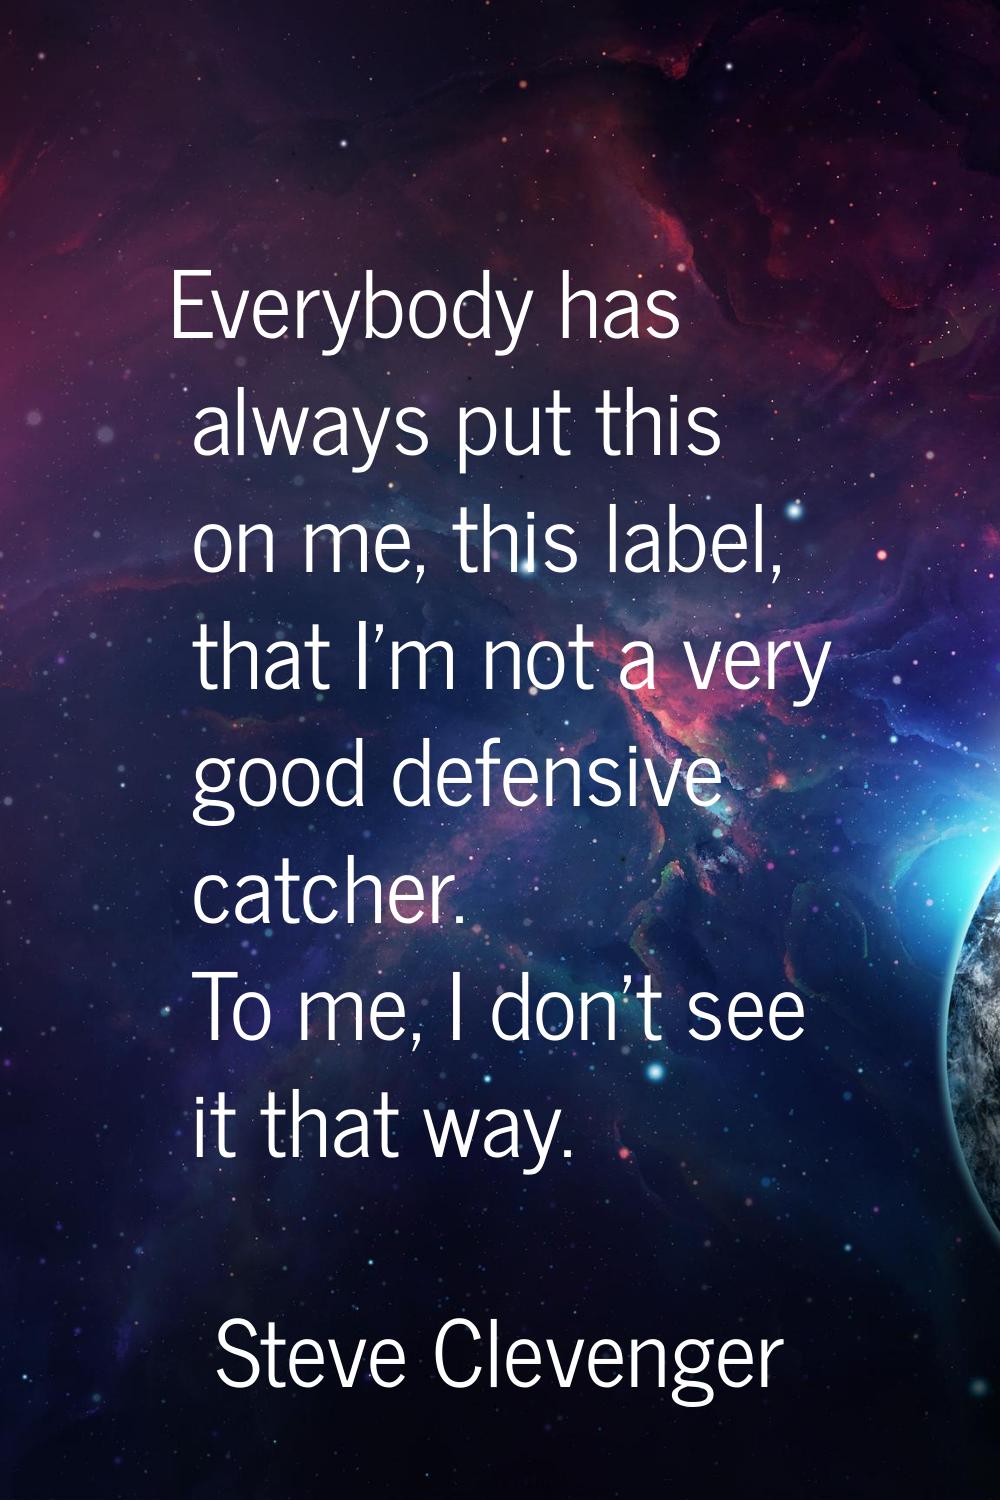 Everybody has always put this on me, this label, that I'm not a very good defensive catcher. To me,